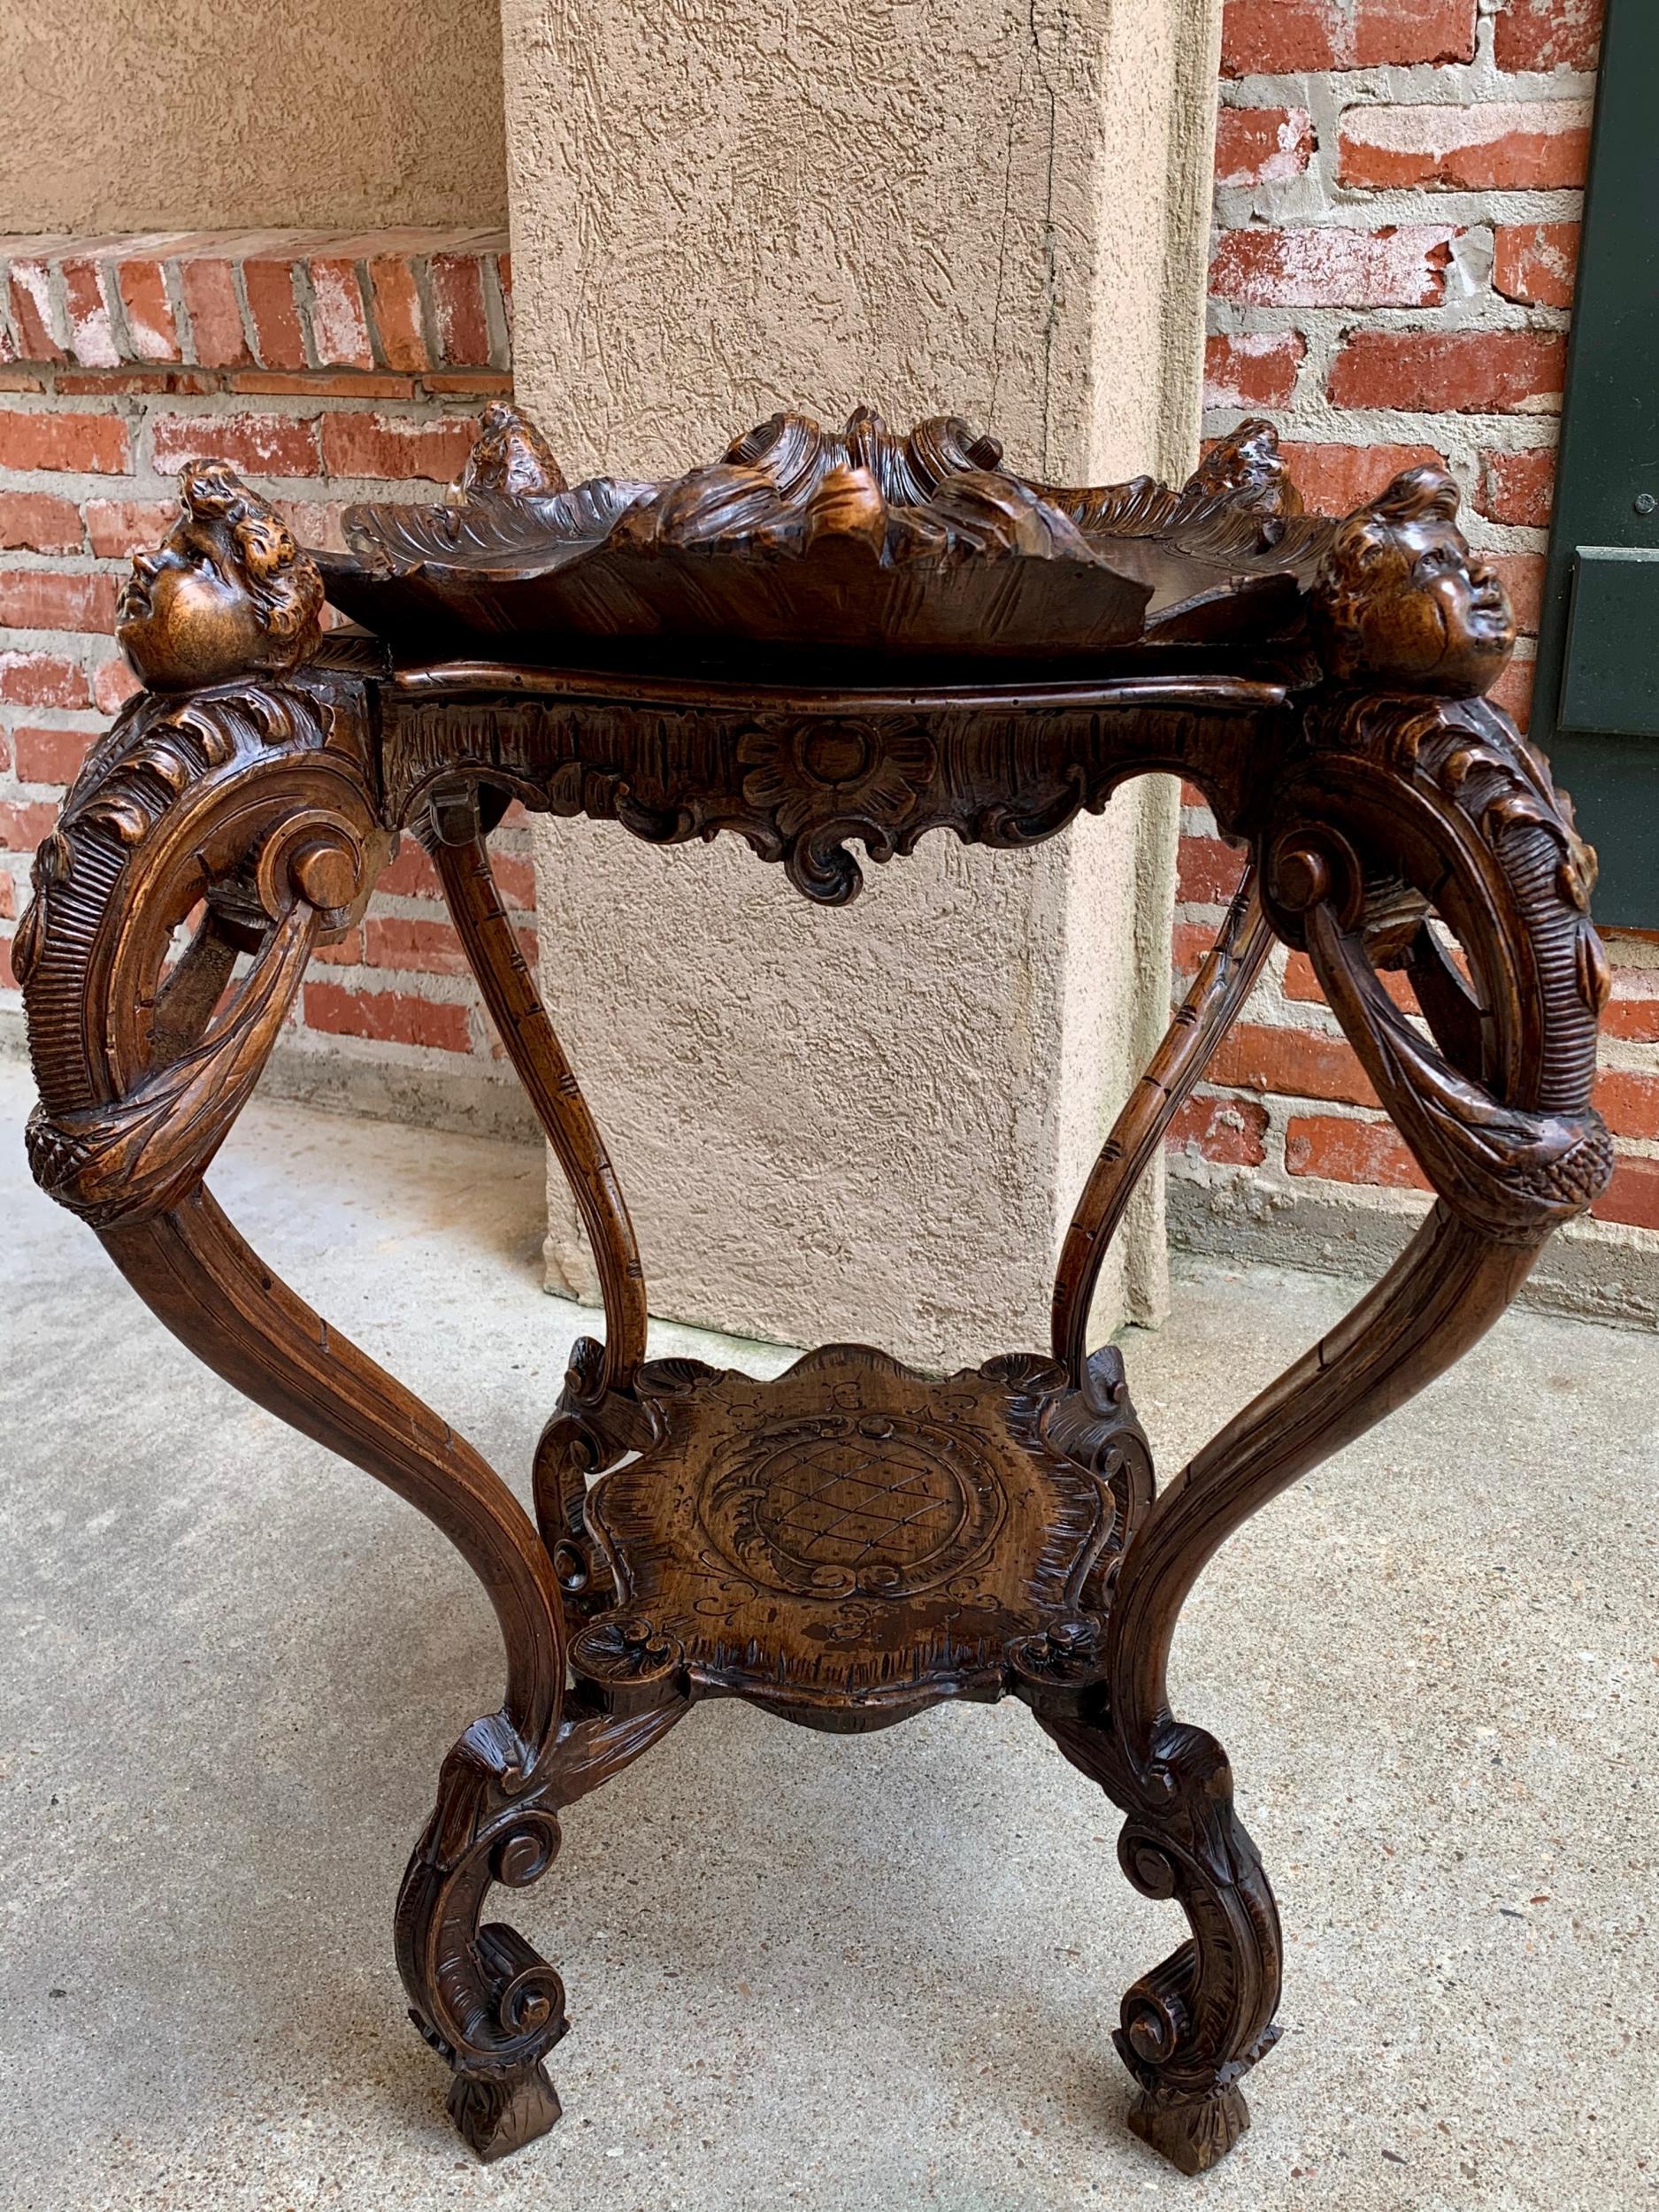 19th century French Carved Oak Sofa Dessert Table Serving Tray Louis XV Cherub For Sale 4